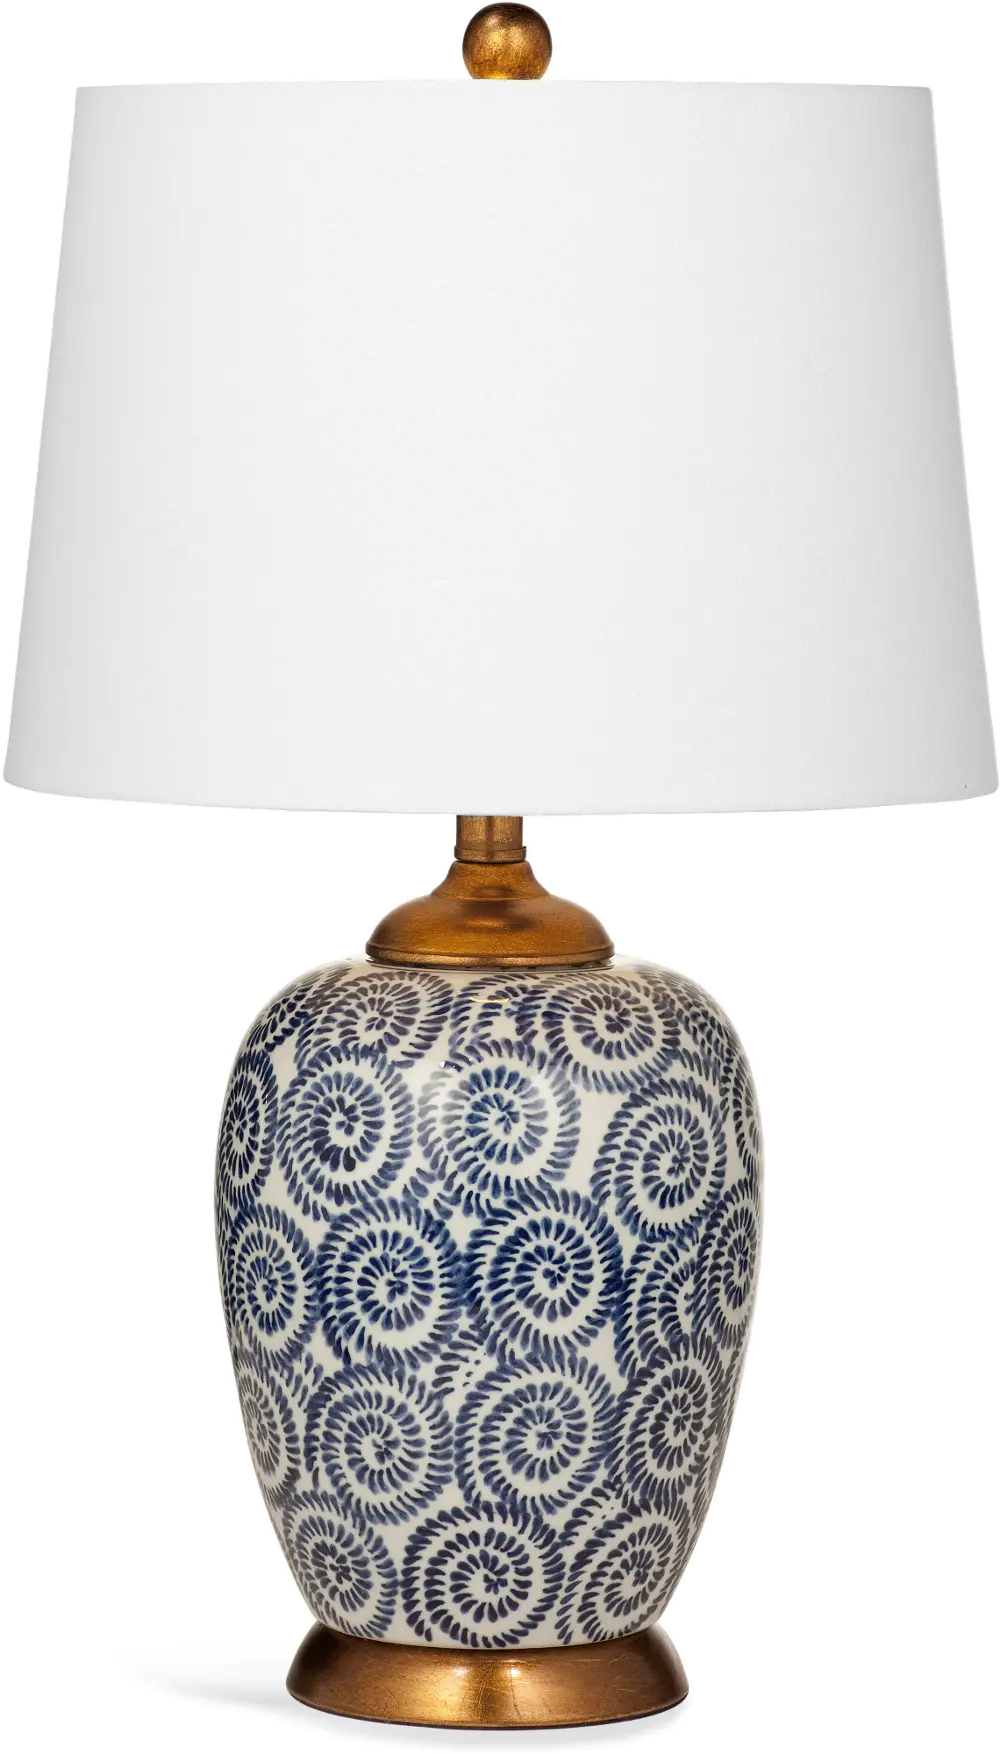 Royal Blue and White Spiral Table Lamp with Rustic Bronze Base-1